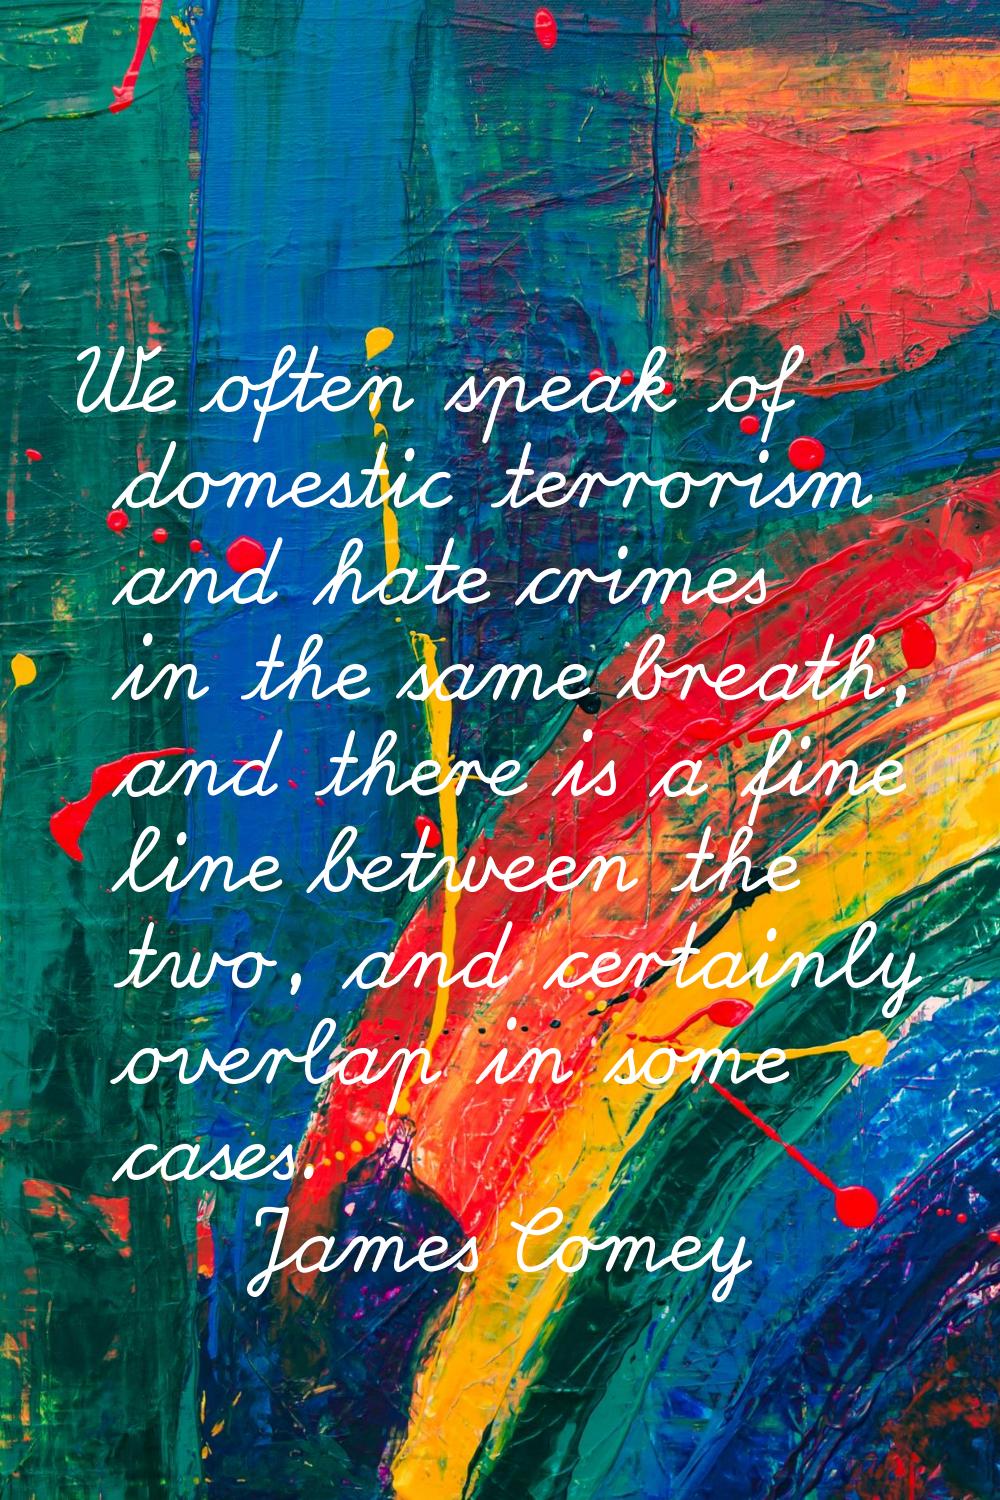 We often speak of domestic terrorism and hate crimes in the same breath, and there is a fine line b